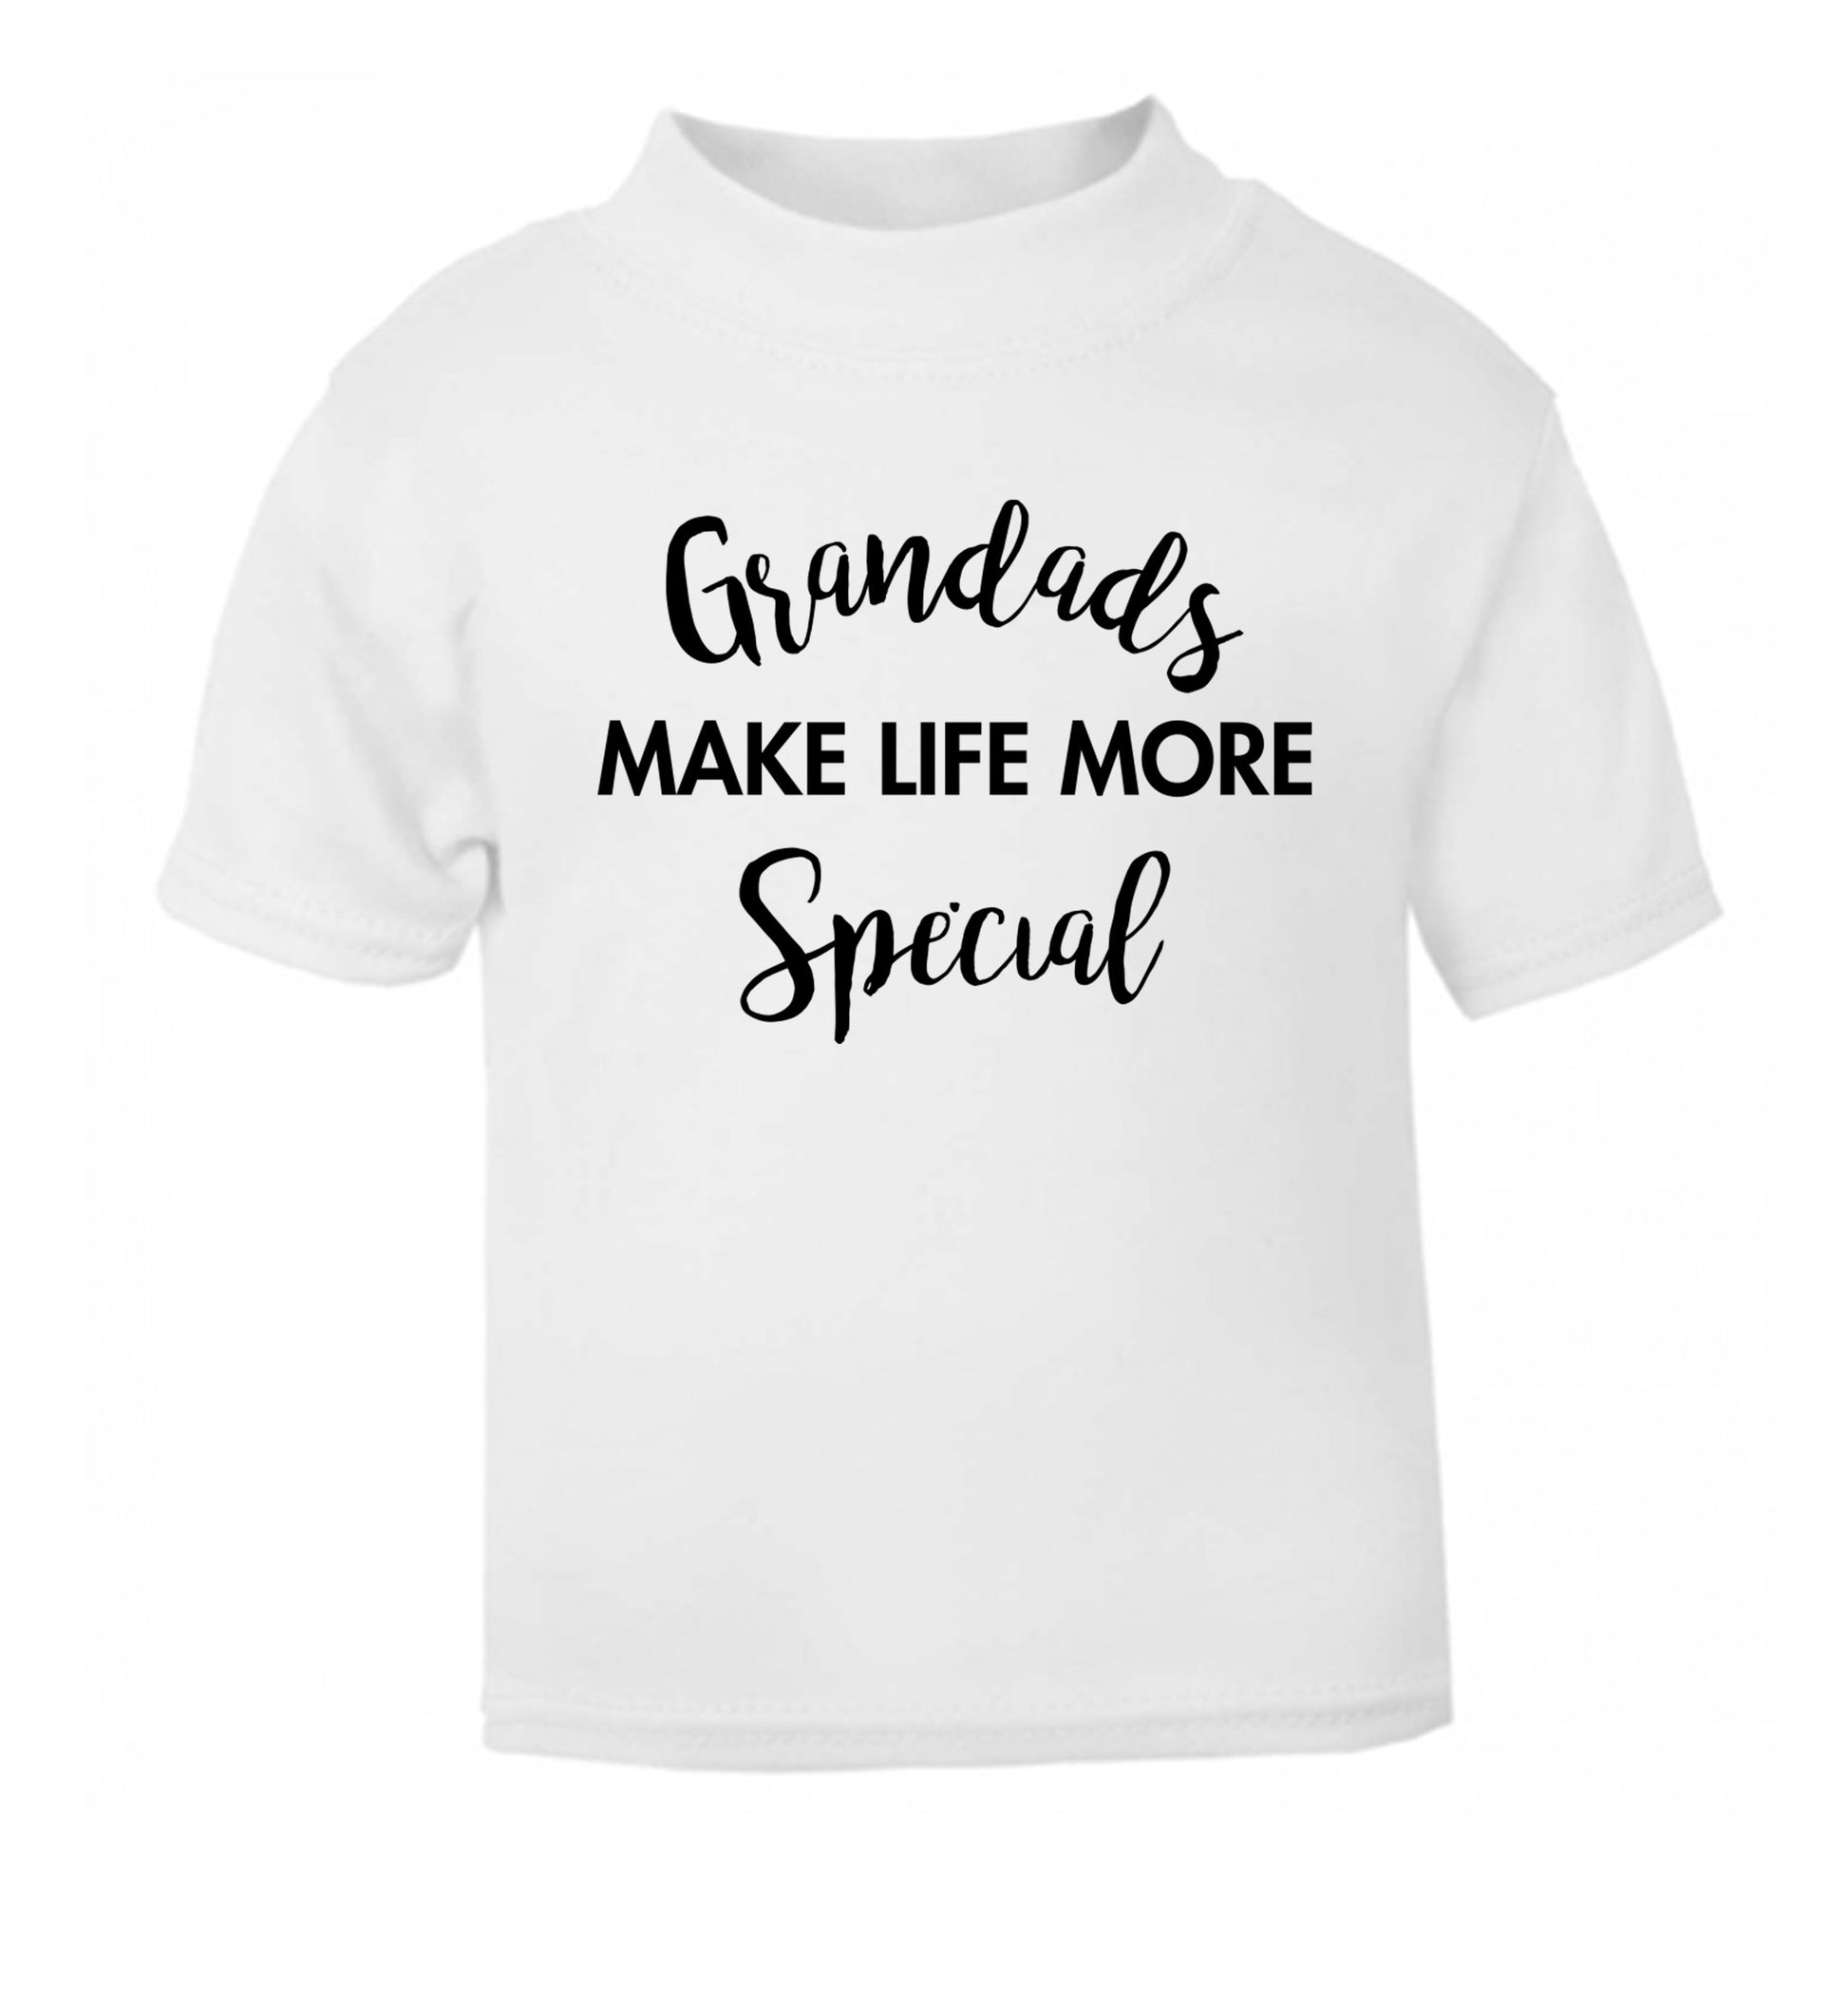 Grandads make life more special white Baby Toddler Tshirt 2 Years